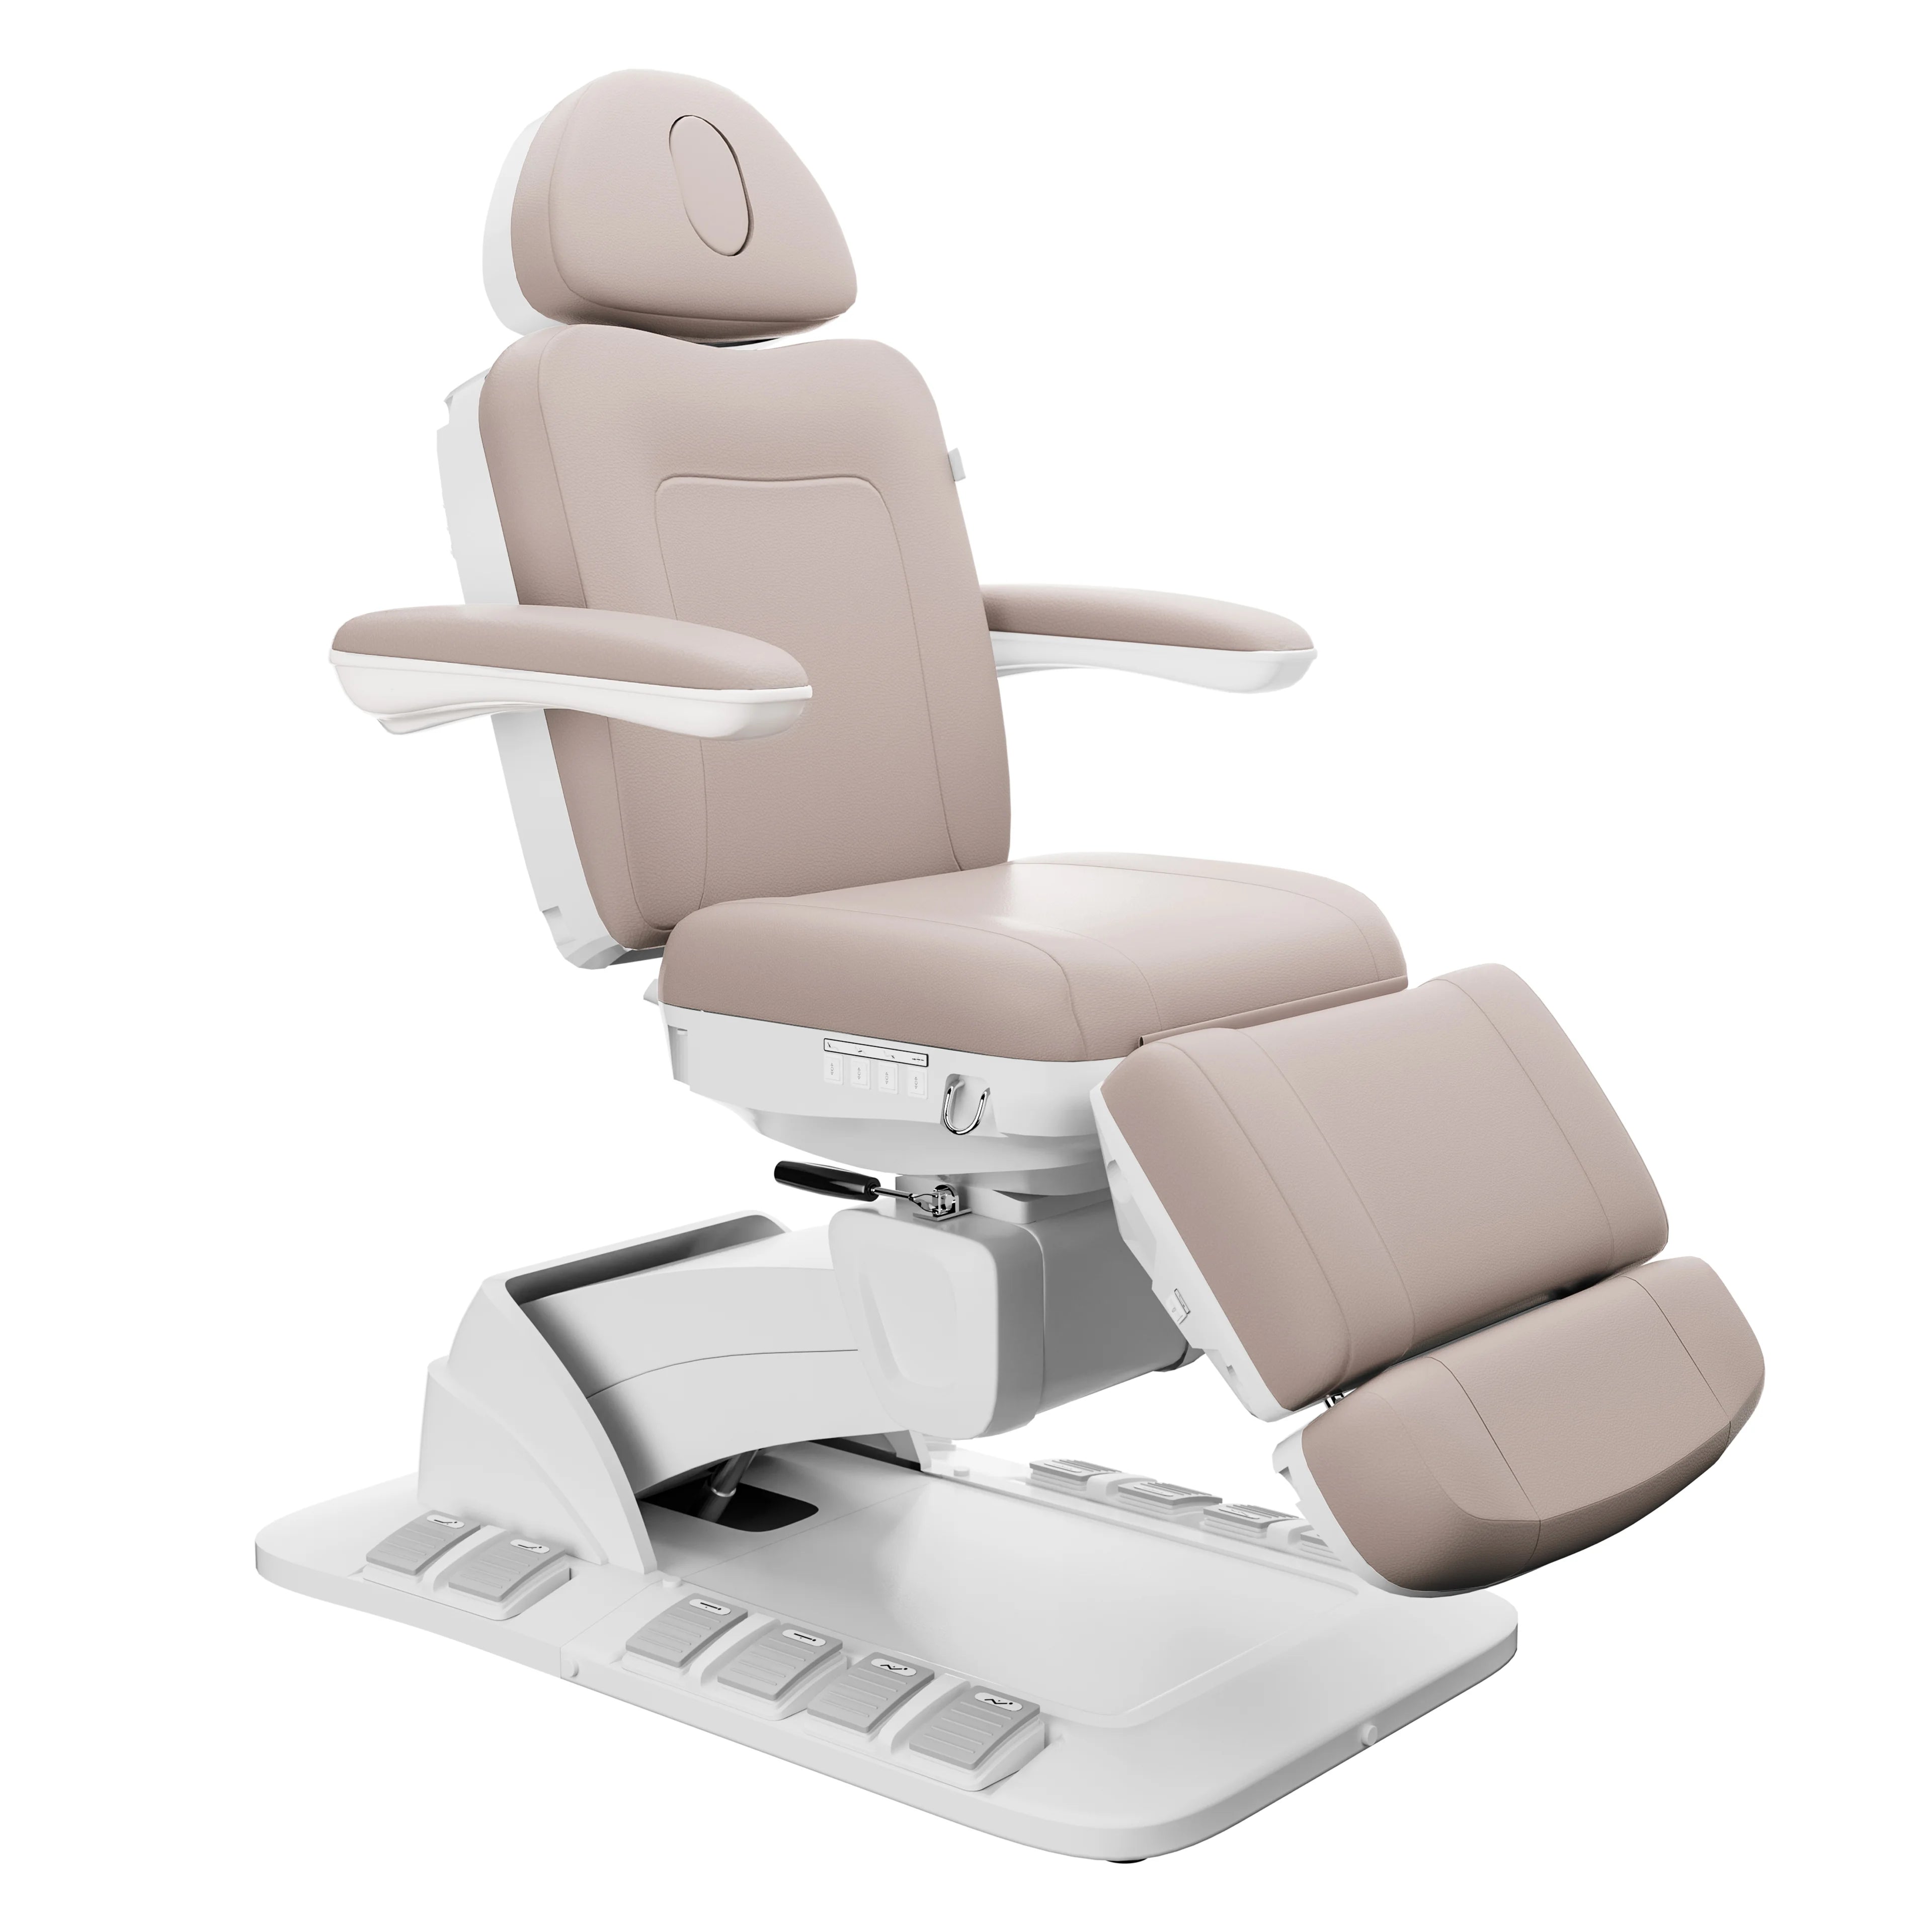 SpaMarc . Novato (Taupe) . Rotating . 4 Motor Spa Treatment Chair/Bed